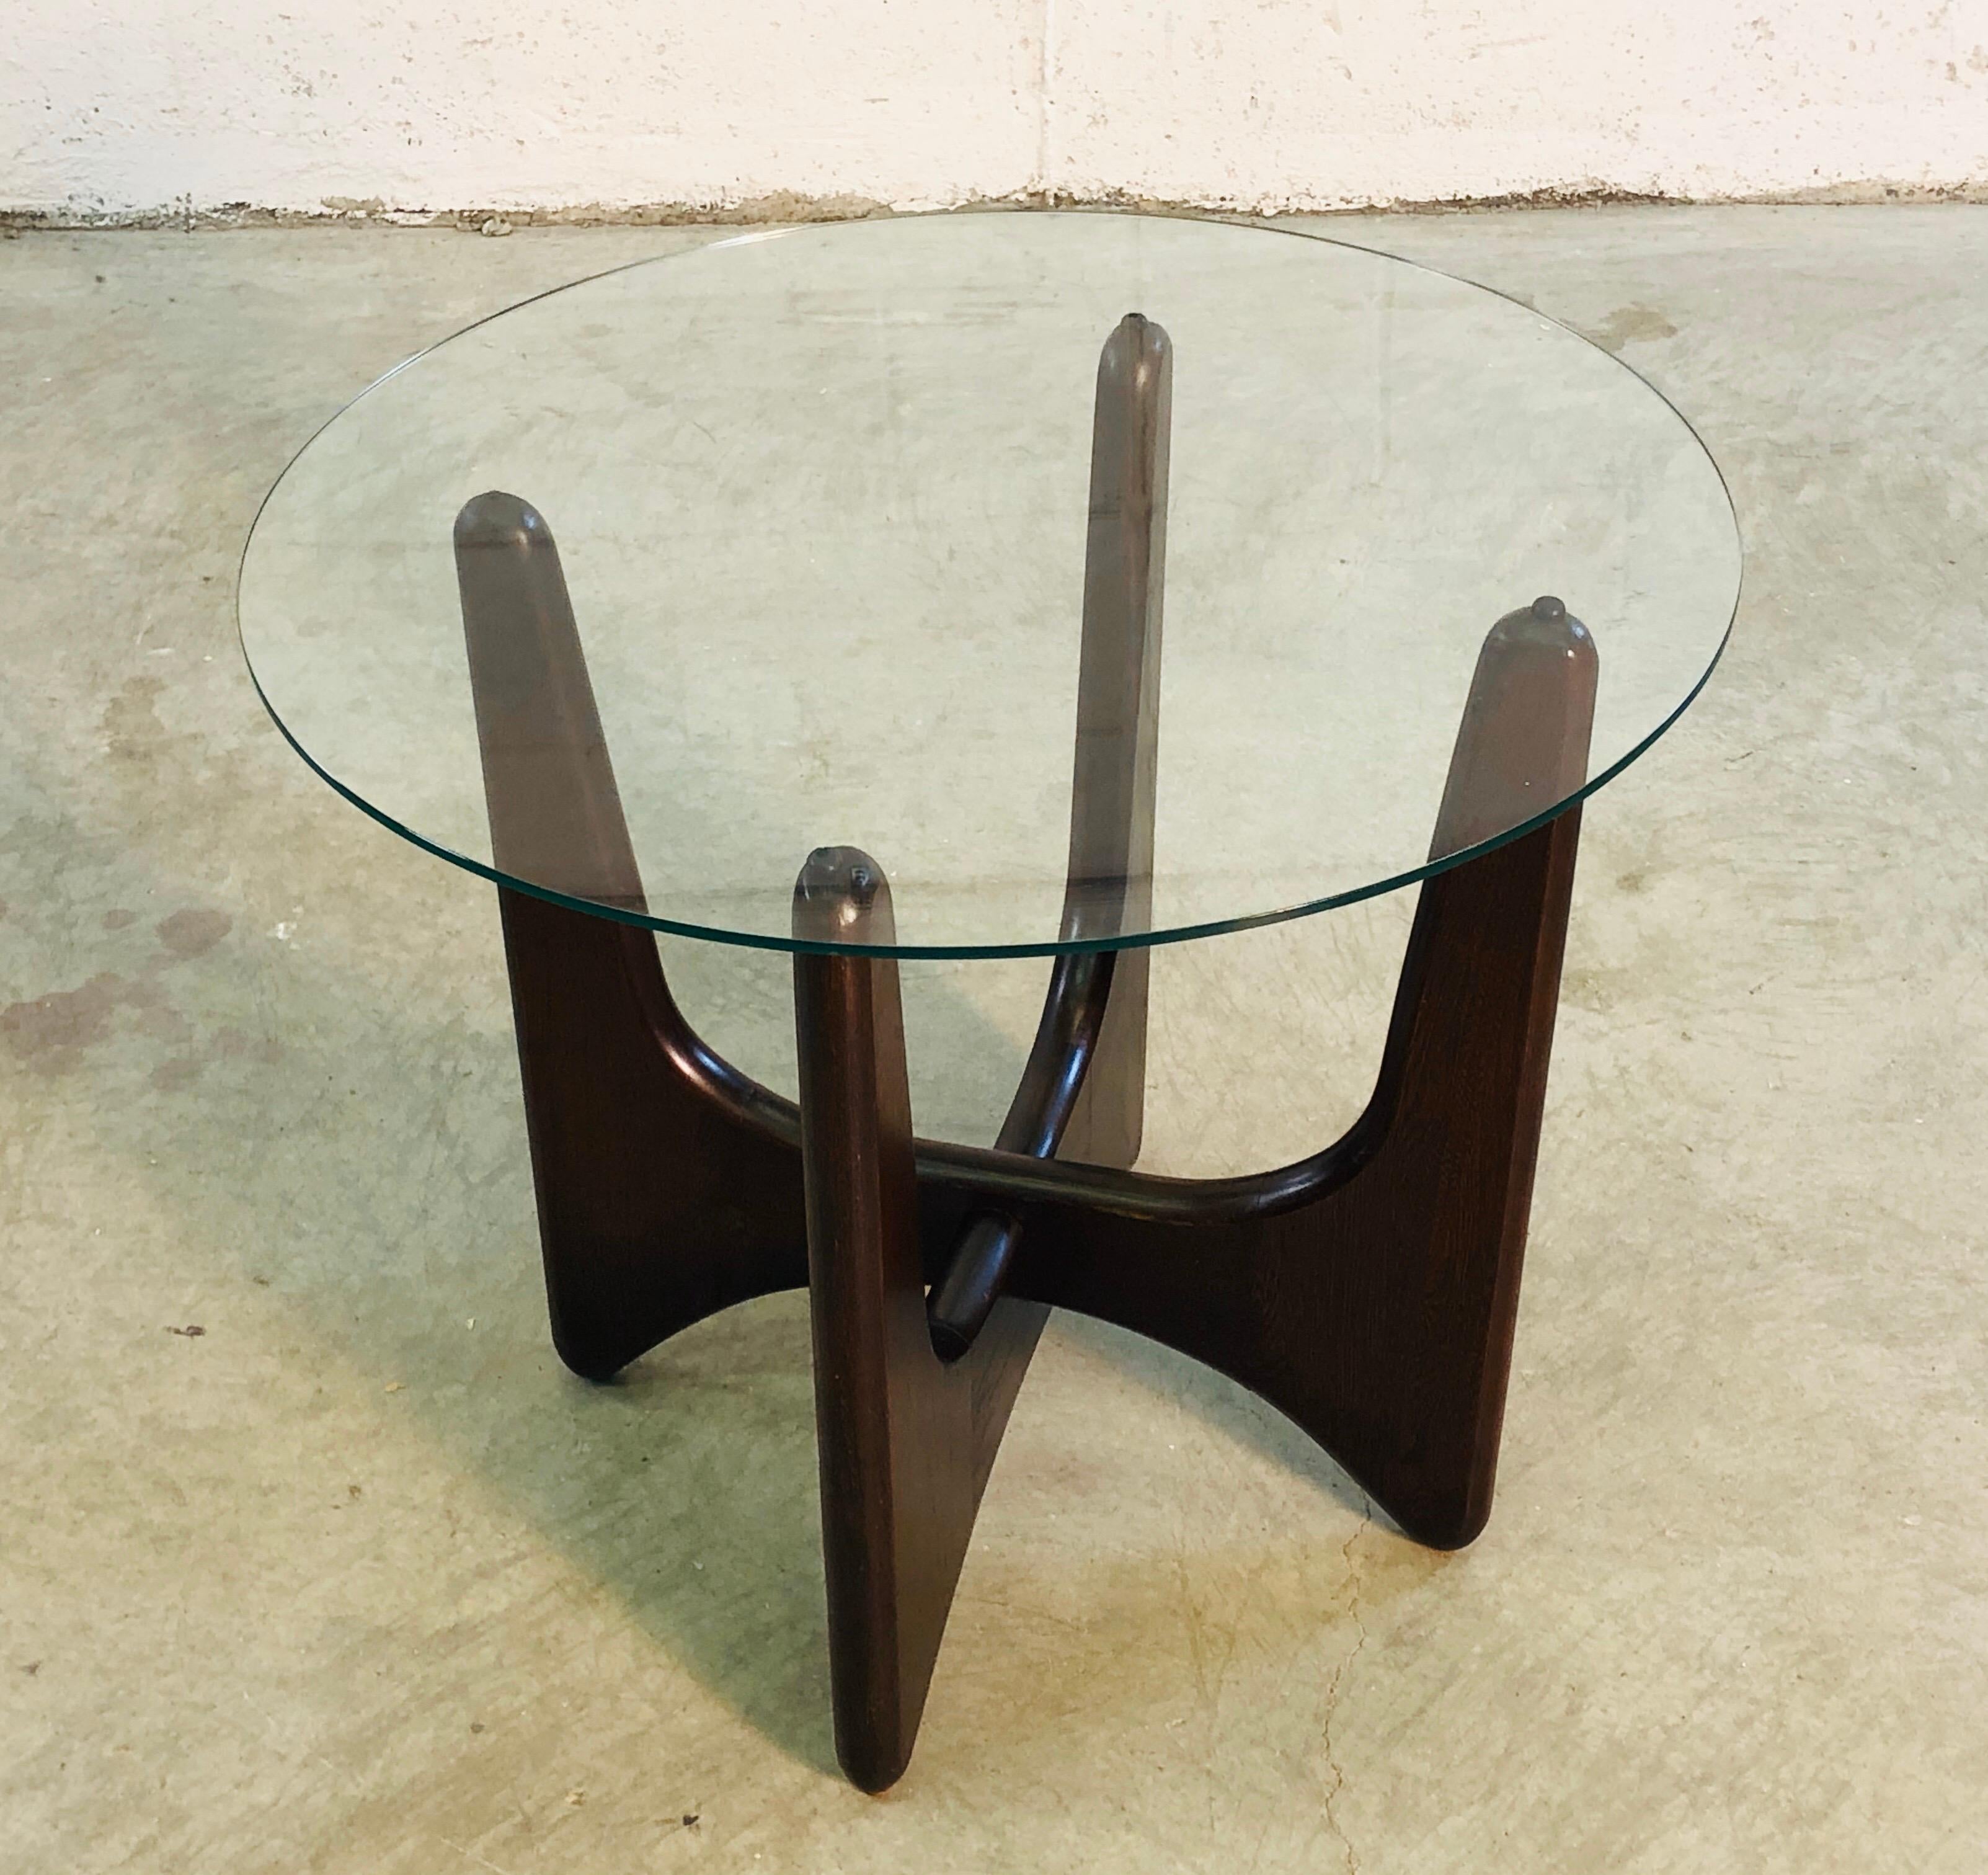 Vintage 1960s Adrian Pearsall glass top and walnut base side table. Classic Pearsall designed wood base with a round glass top. Very good used condition. No marks.
Base only measures: 13” L x 14” W x 19.75” H.